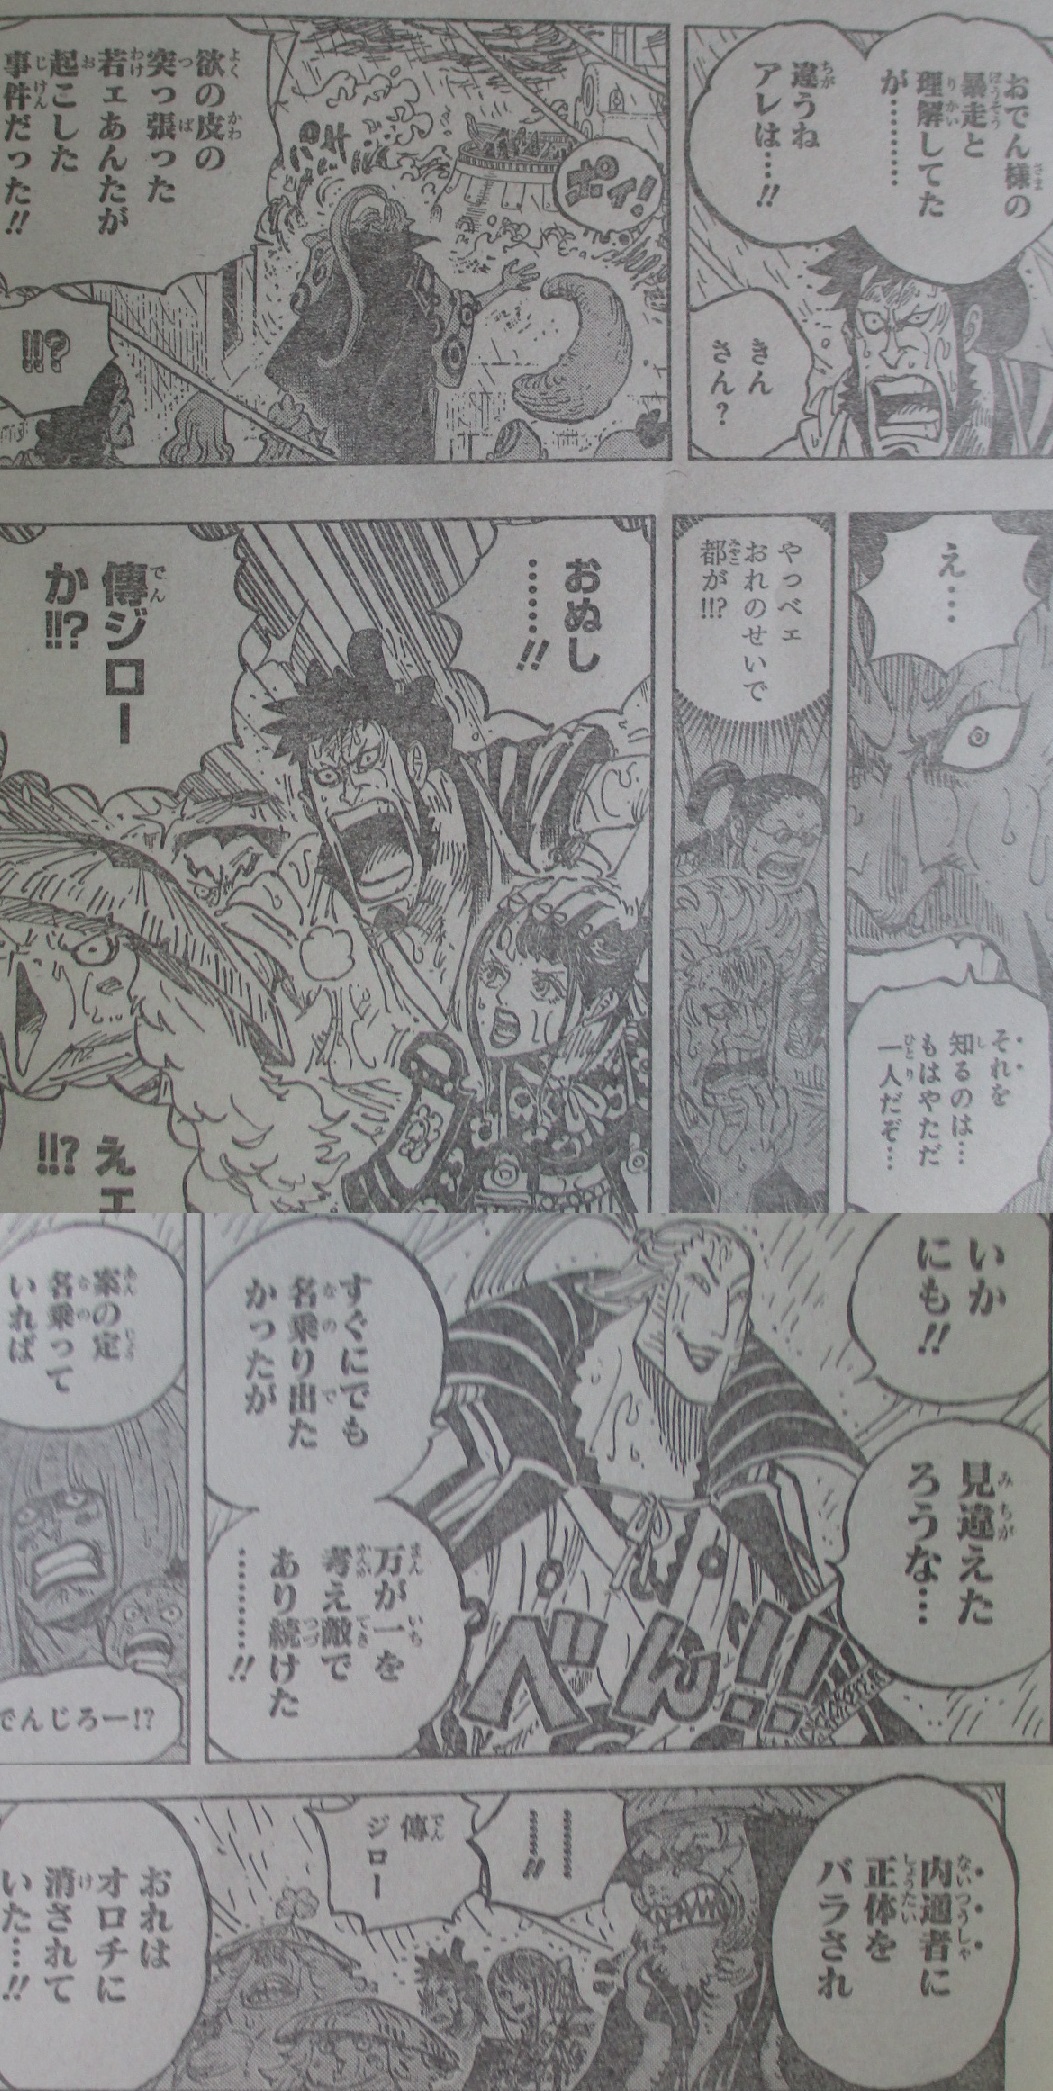 Spoiler One Piece Chapter 975 Spoilers Discussion Page 71 Worstgen